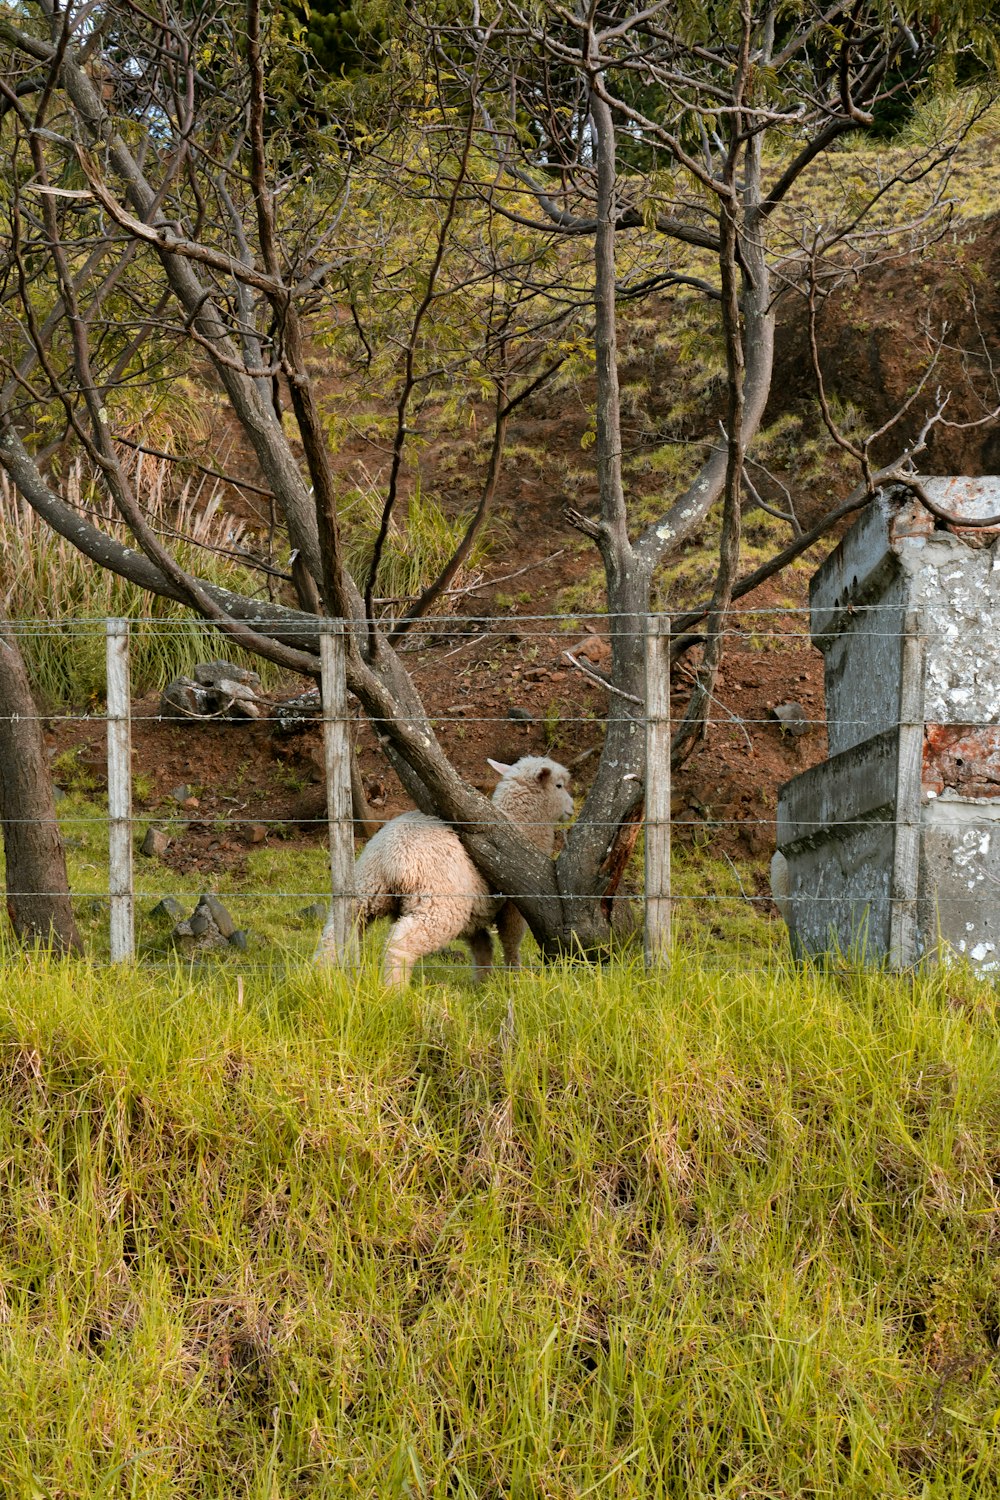 a couple of sheep in a fenced in area